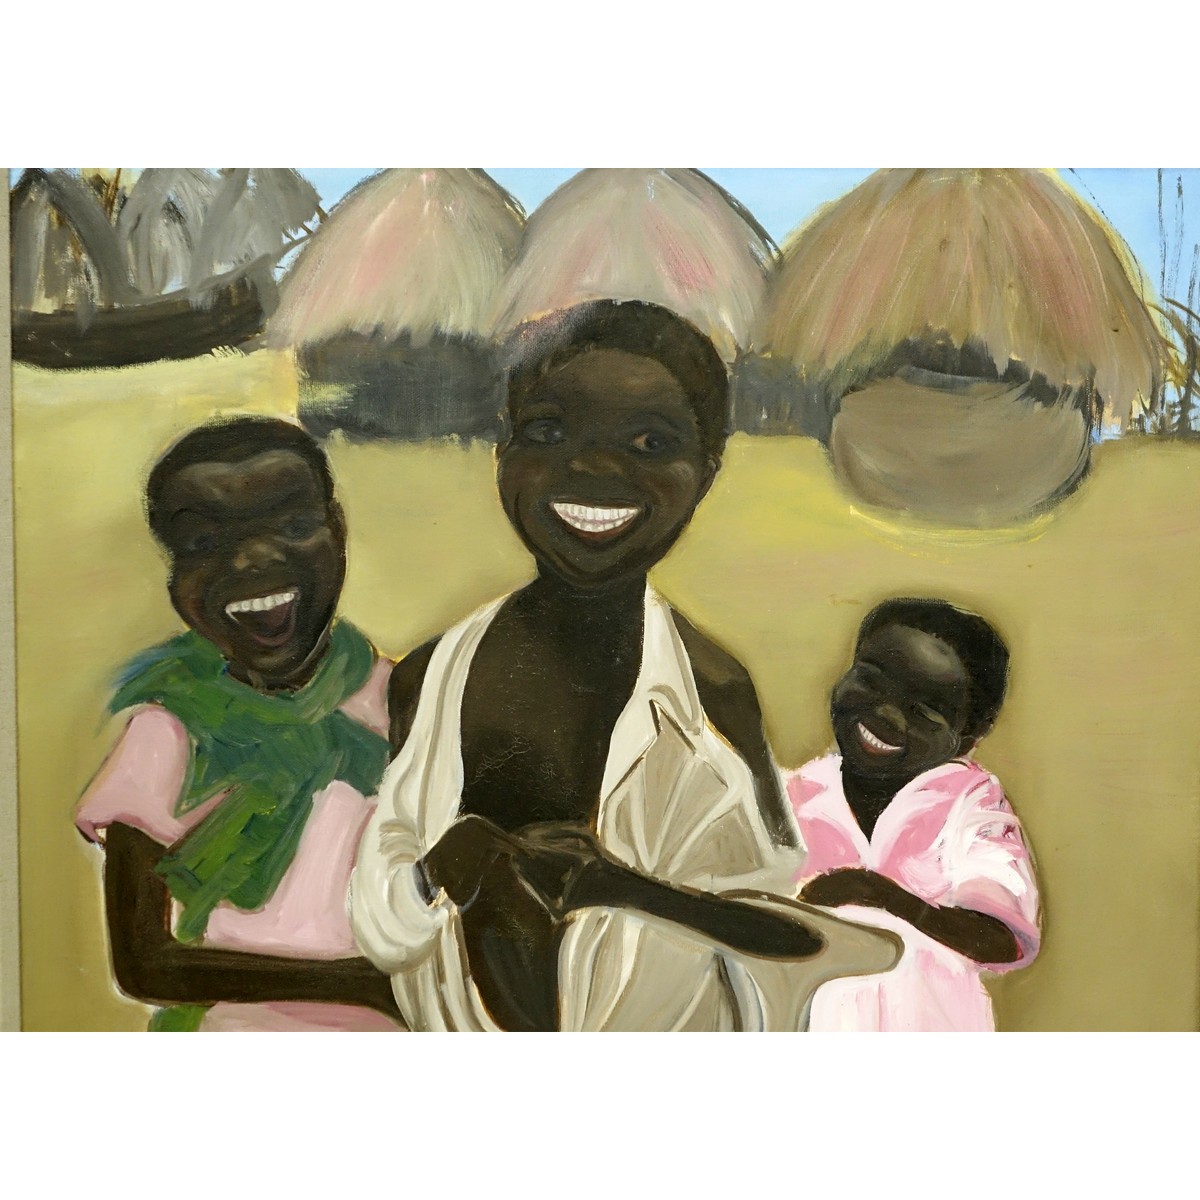 Hayes (20th C) Oil on Canvas, Tribal Children in Village, Signed and Dated 1995 Lower Right. Art Basel 2007 inscription en verso.